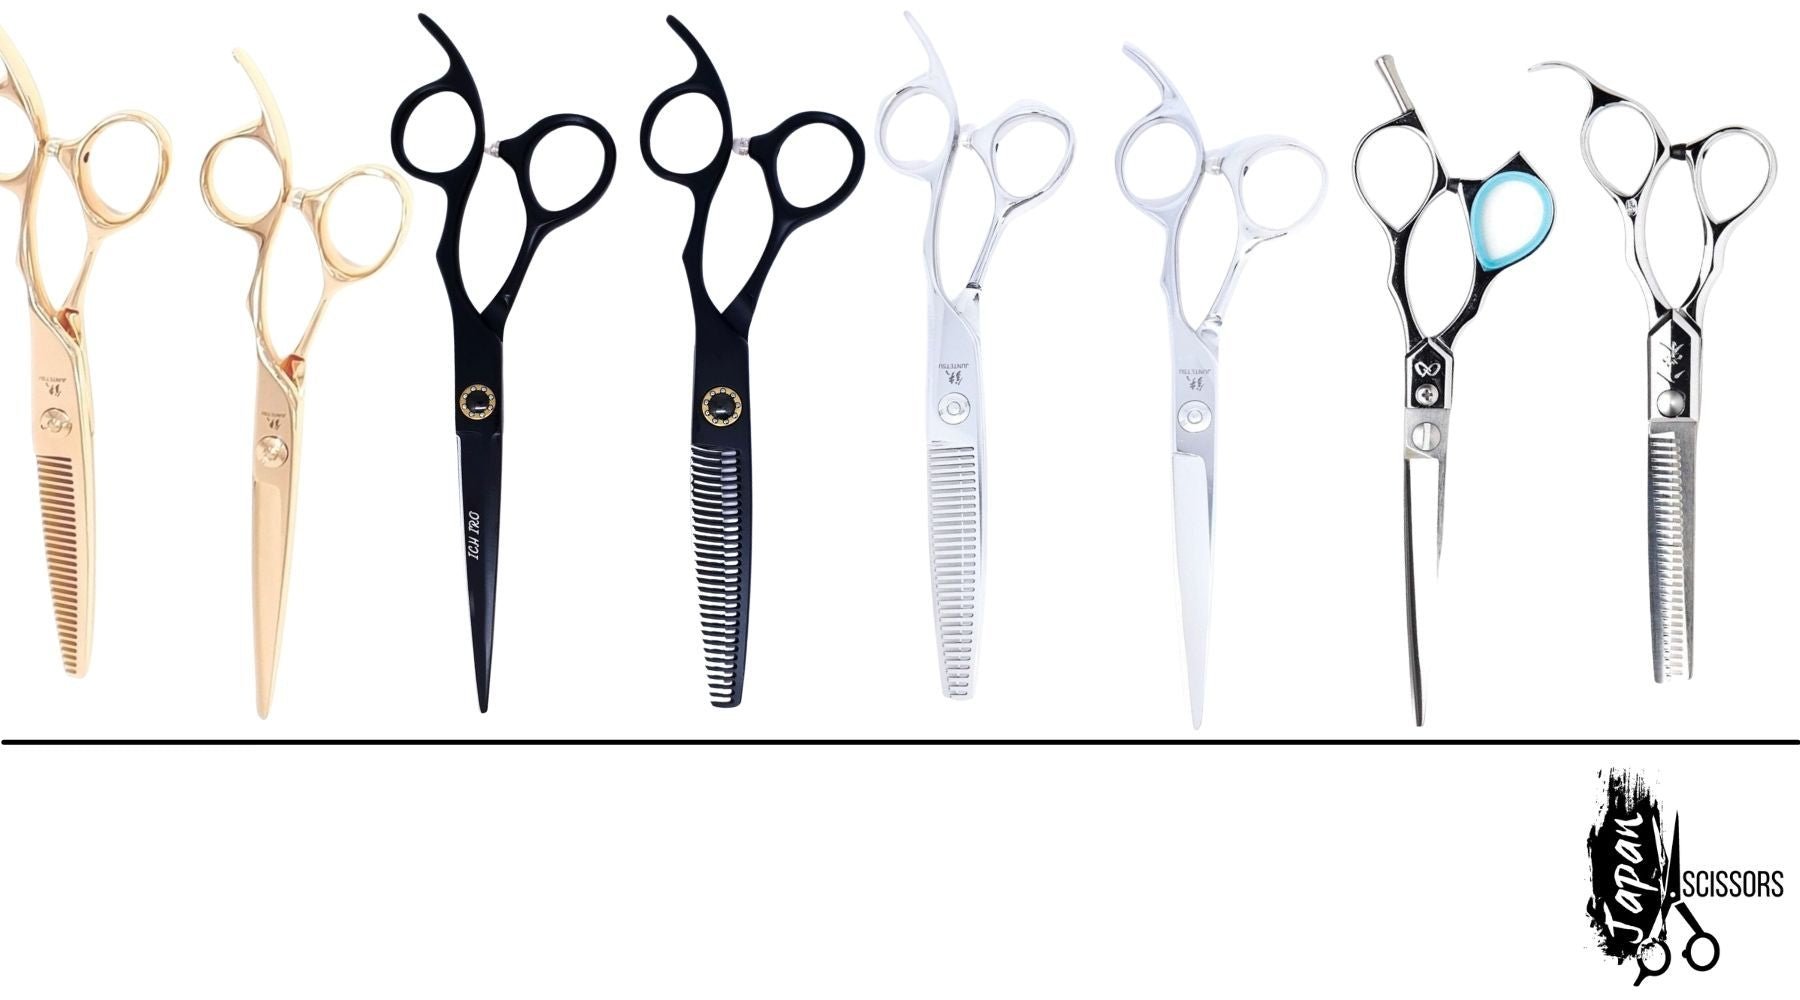 Gpoty Hair Cutting Scissors Set, 12pcs Professional Haircut Scissors Kit with Thinning Scissors, Hair Razor Comb, Cape, Clips, Storage Bag for Barber